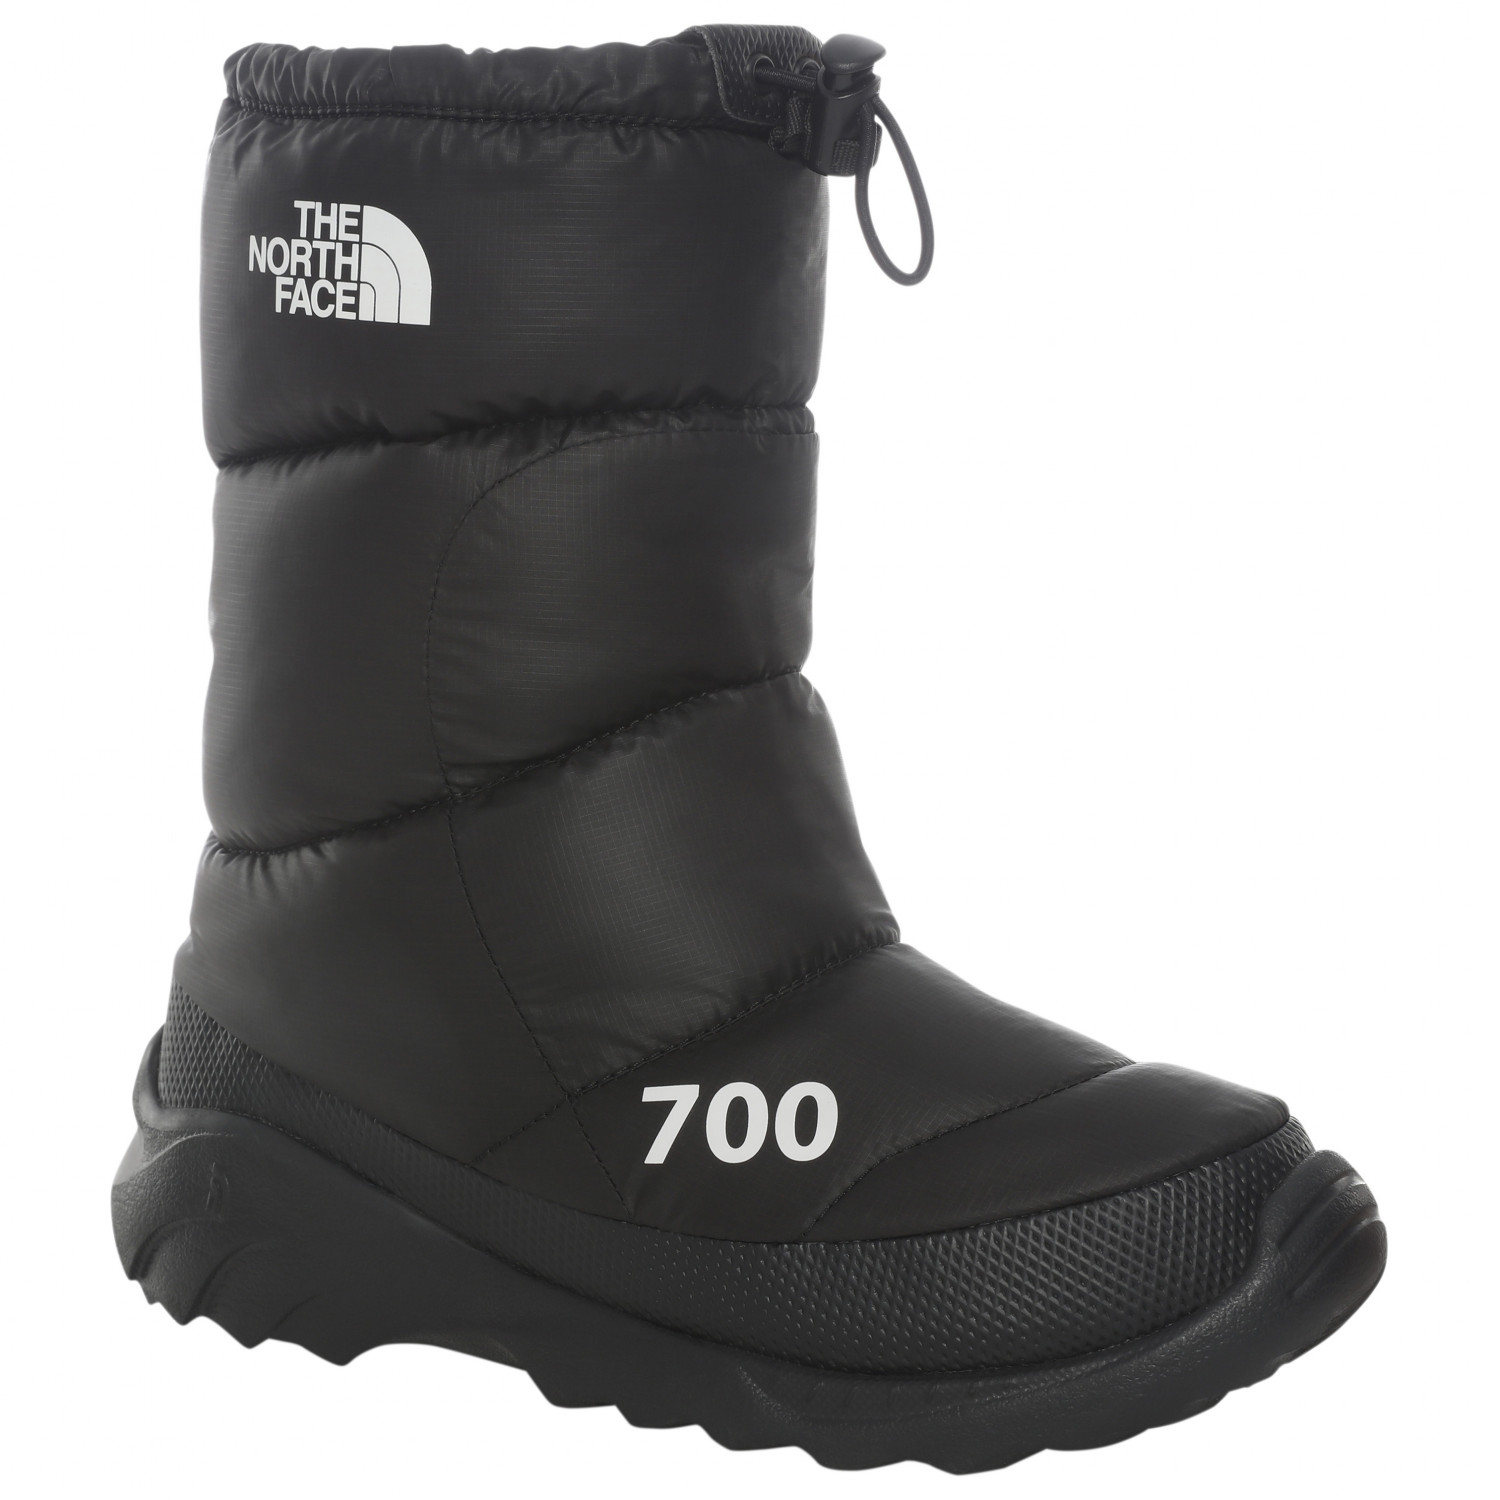 the-north-face-womens-nuptse-bootie-700-winter-boots.jpg